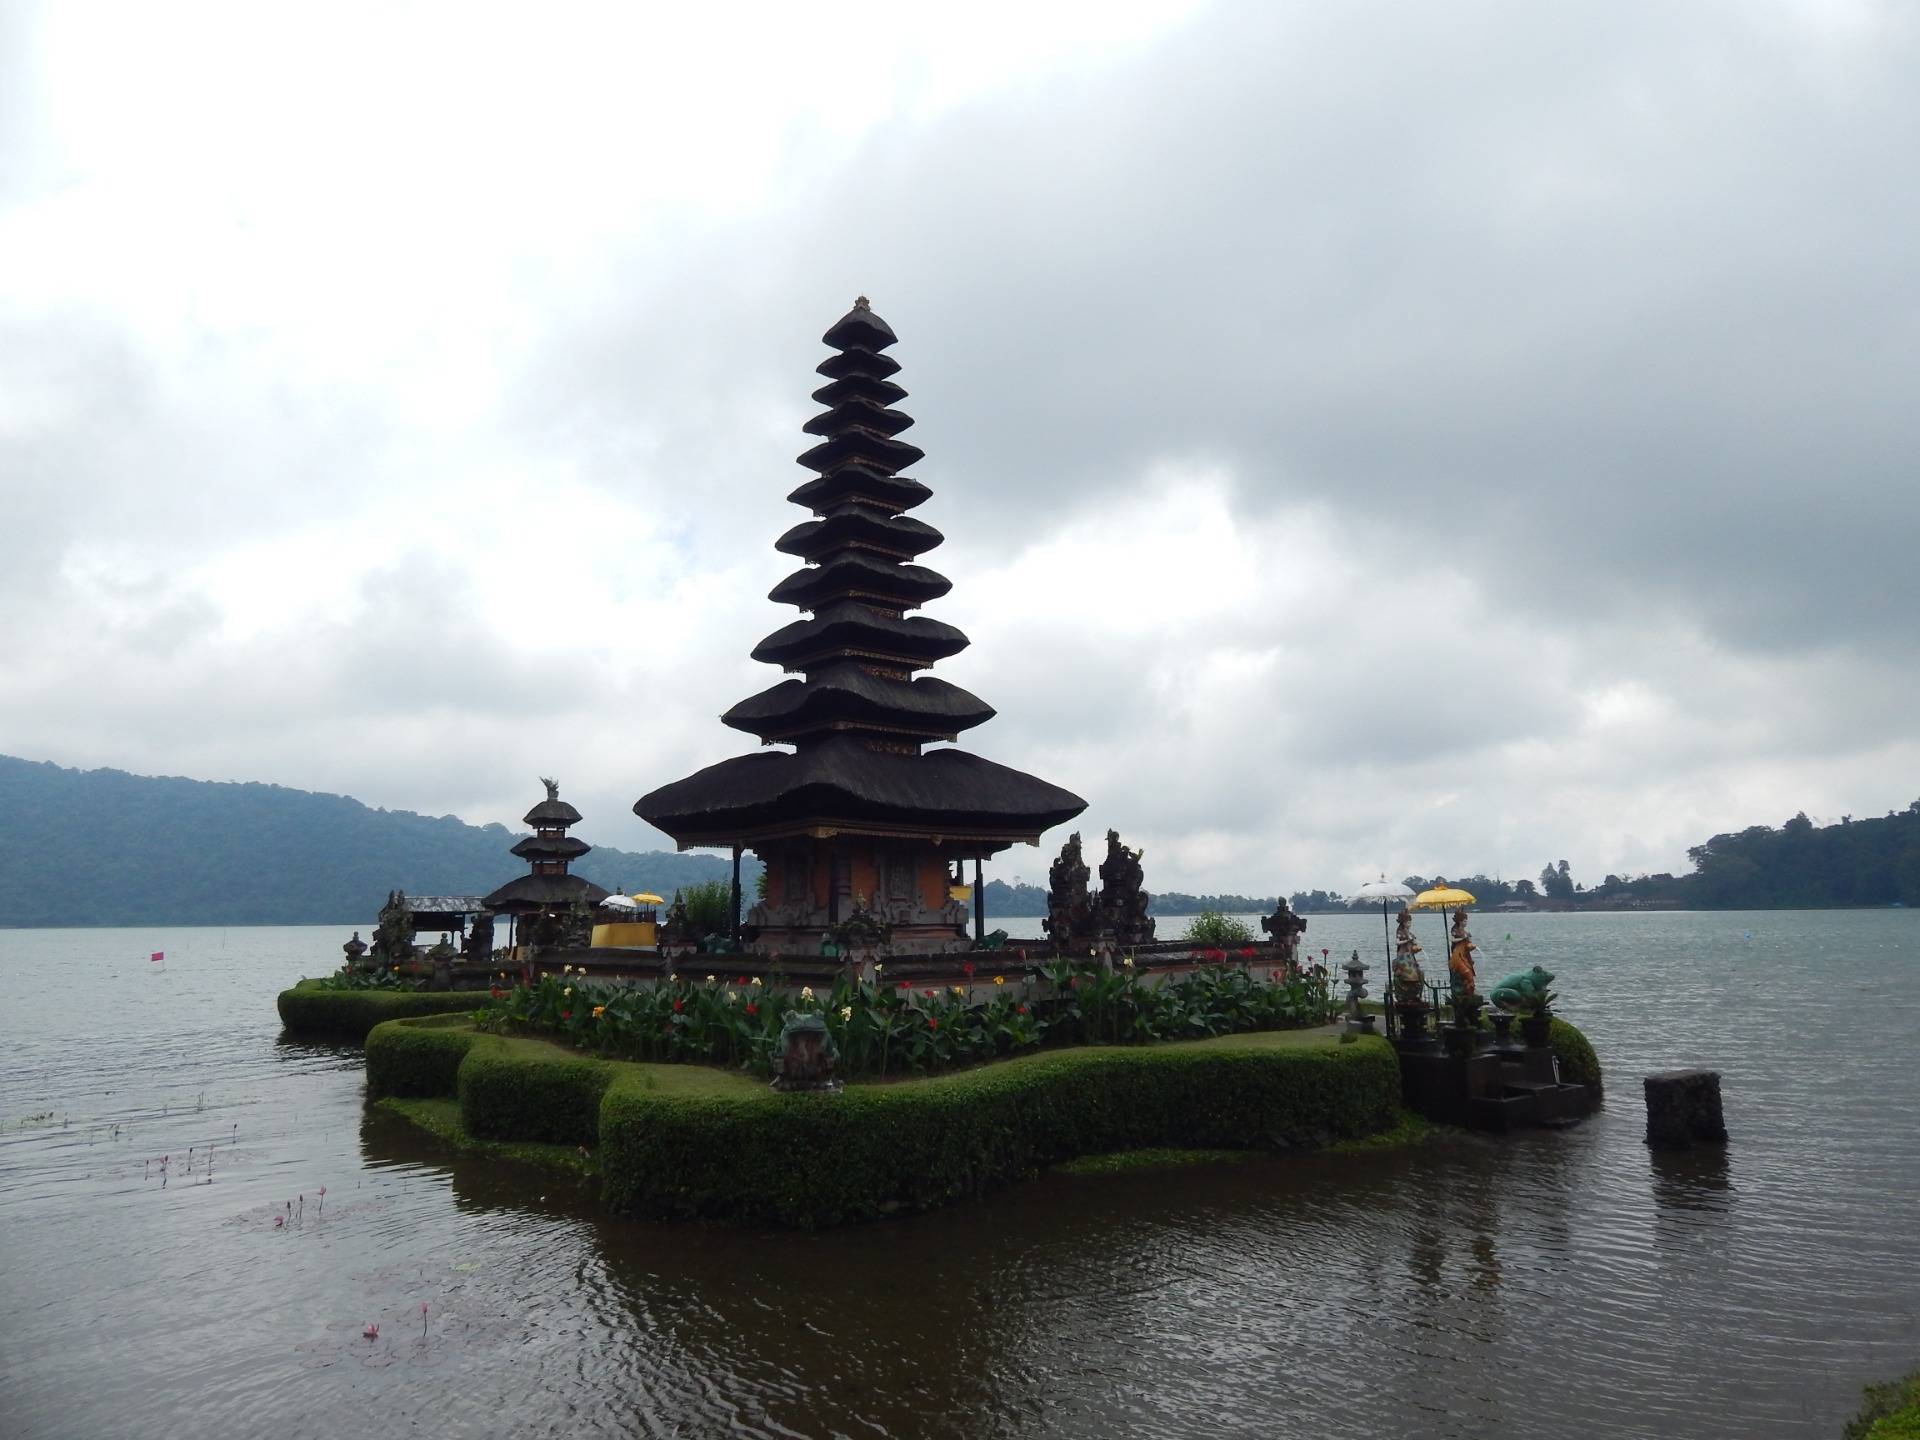 Another shot of the Bali’s Lake Temple.